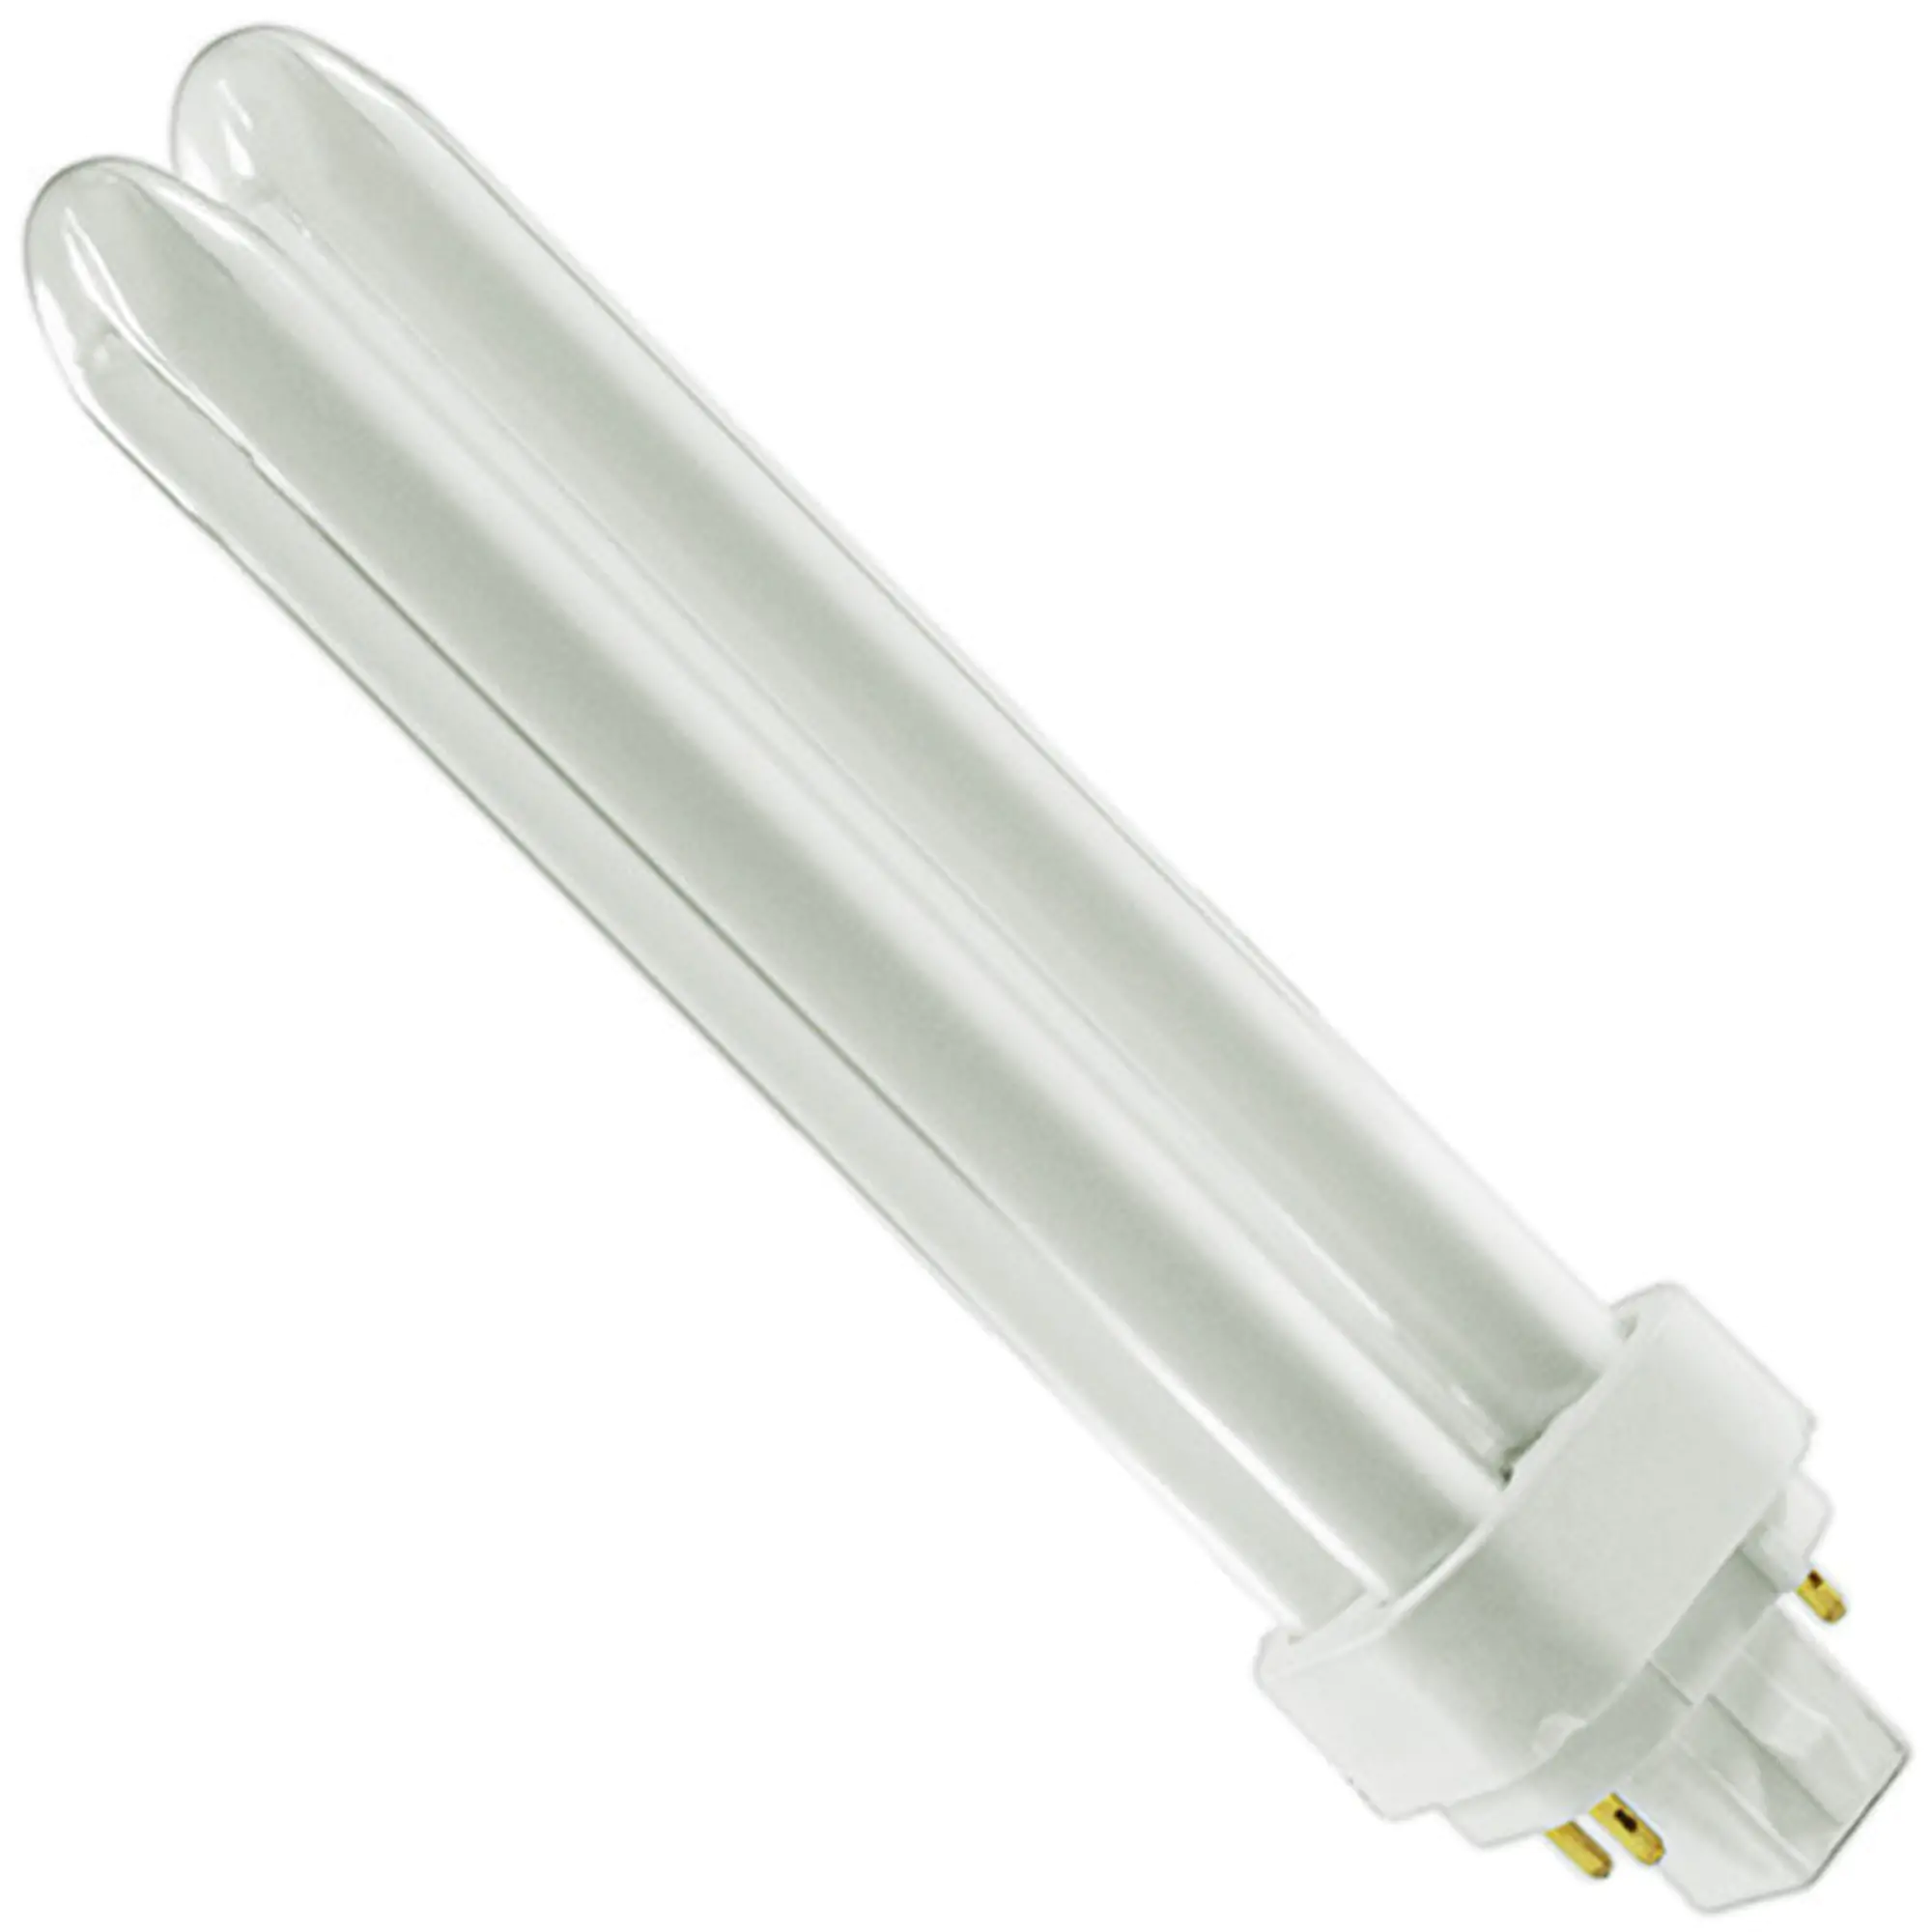 Sylvania 4100K Cool White Fluorescent 26W PLD Double U-Shaped Twin Tube CFL Bulbs with 4-Pin G24Q-3 Base (10 Pack)